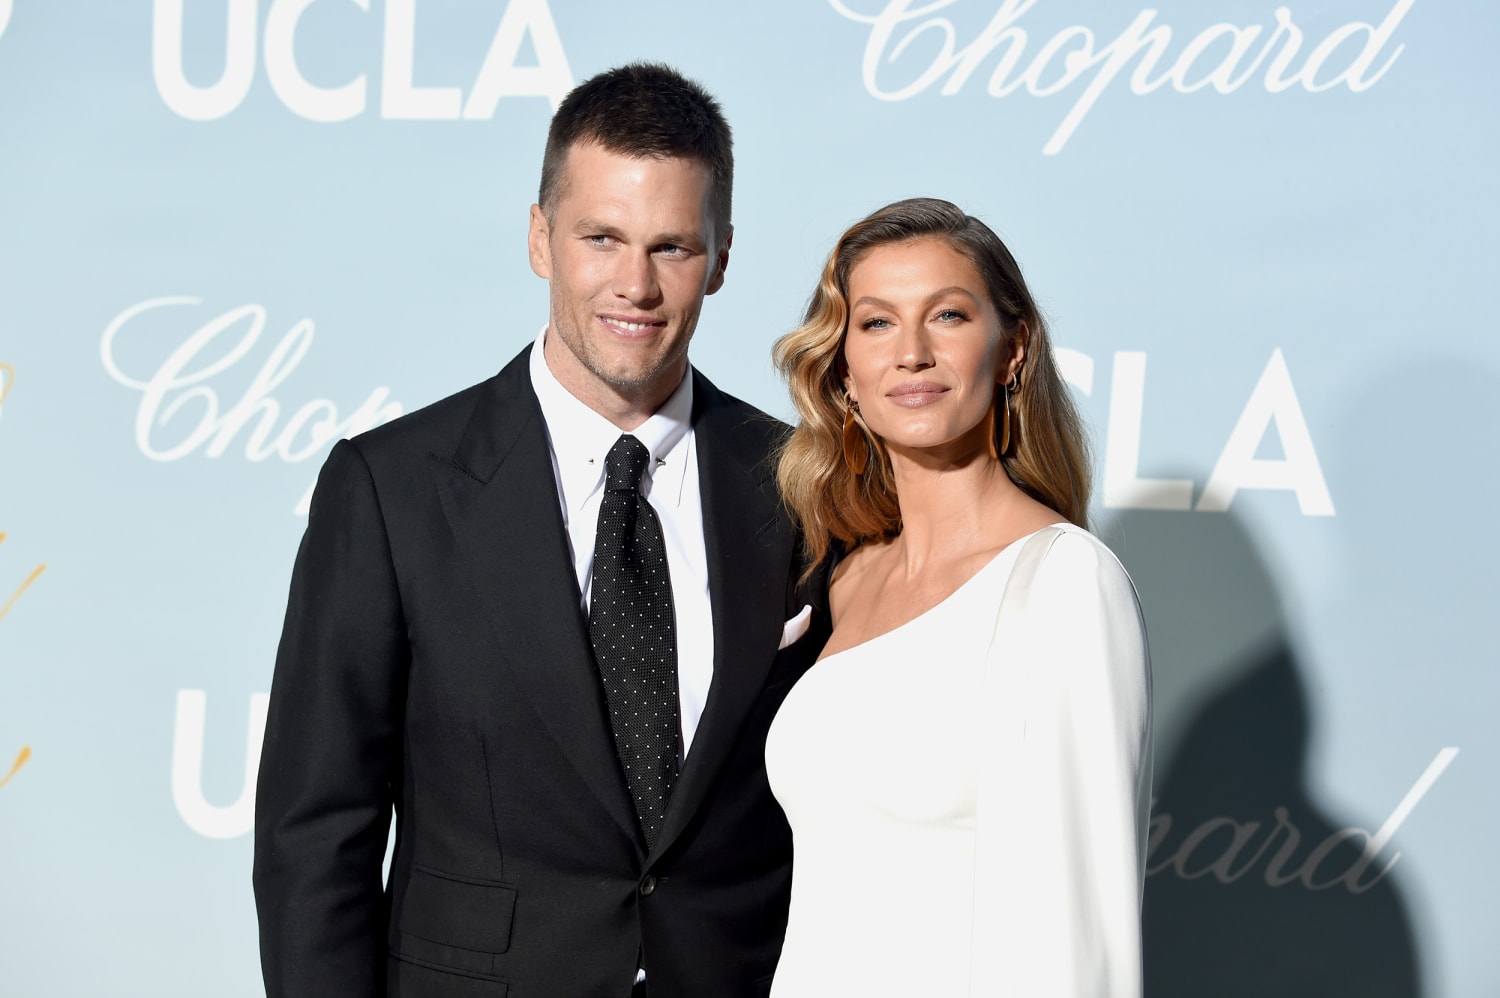 Gisele Bündchen reveals the 'most important thing' about parenting preteens